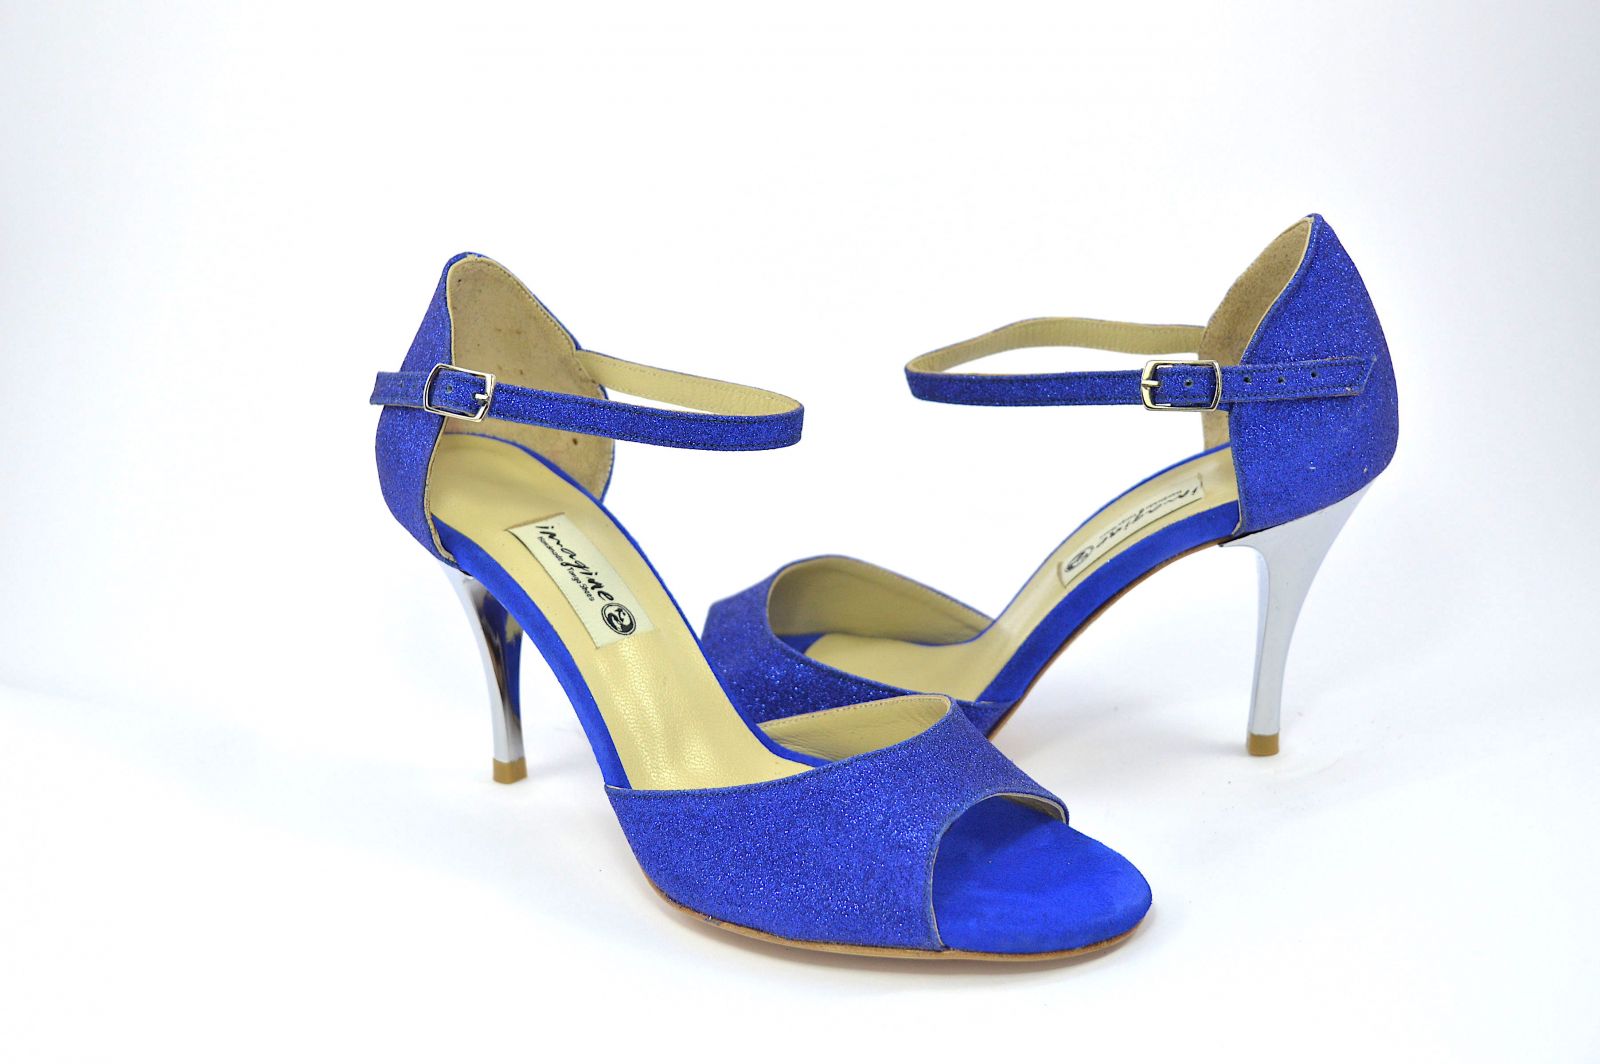 Women tango shoes, open toe, in royal blue glitter and blue suede leather